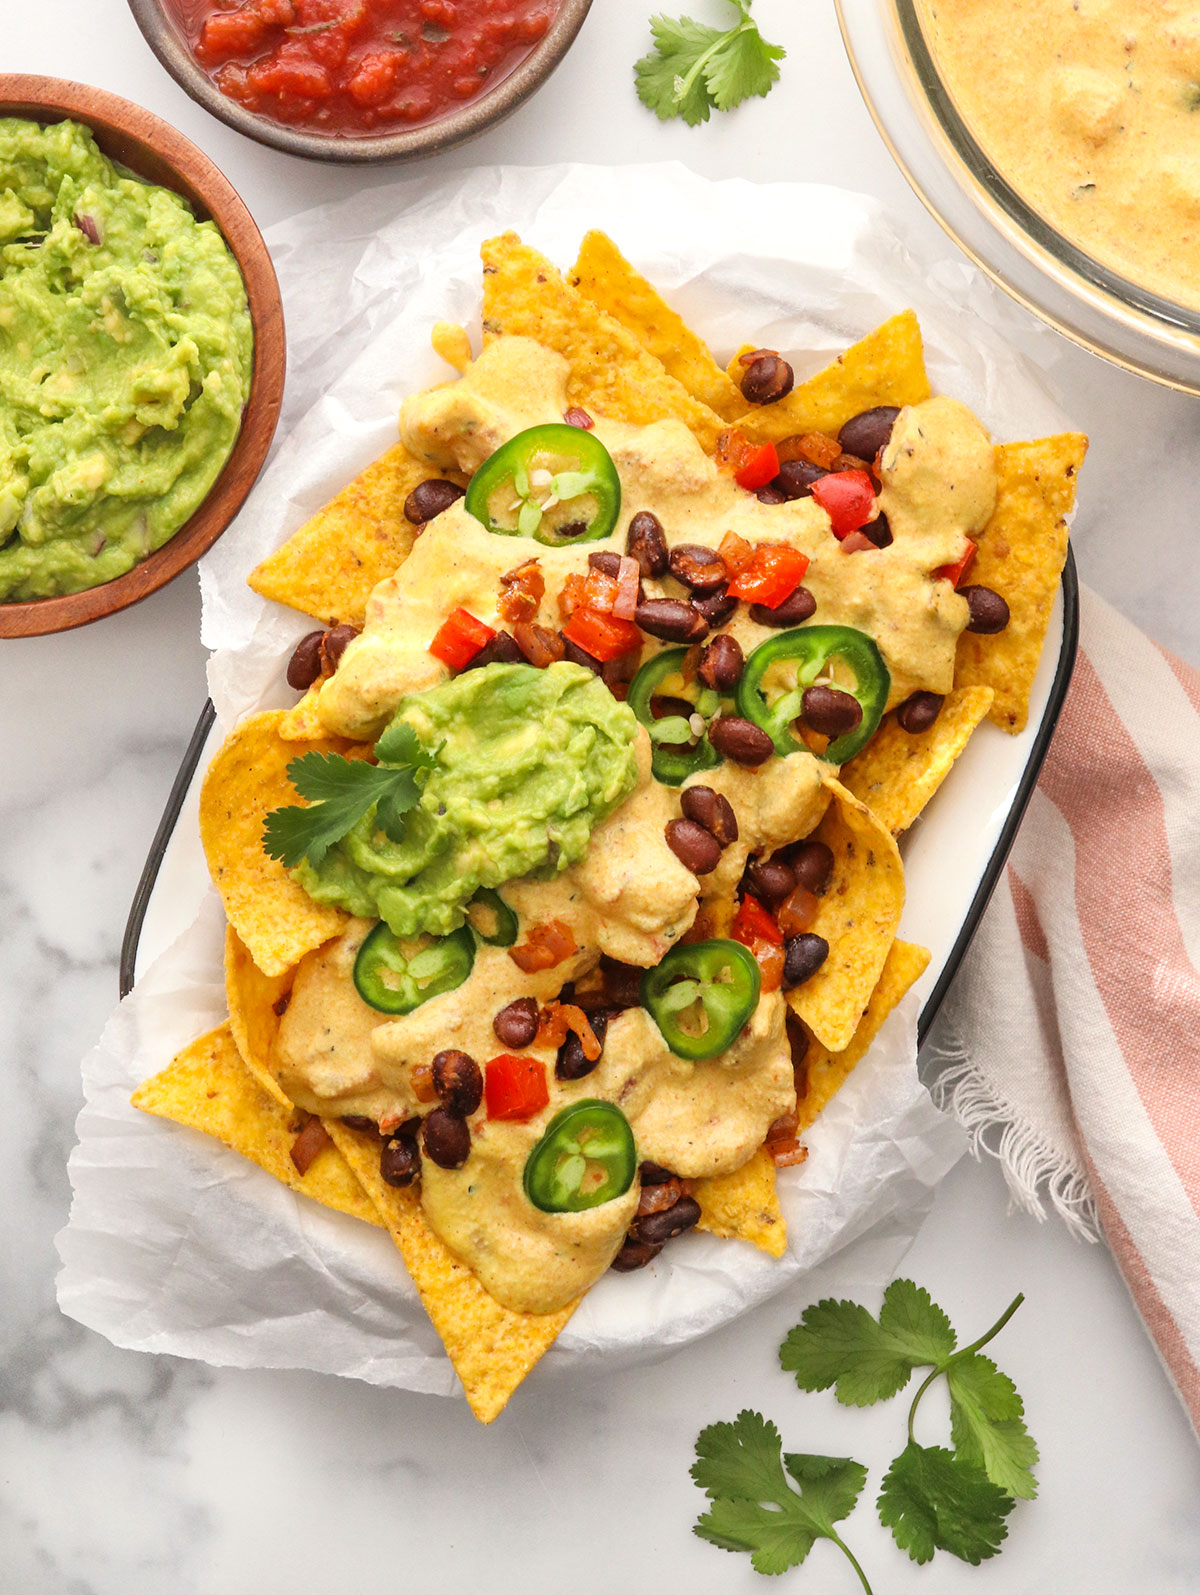 Vegan nachos topped with queso jalapeno slices and guacamole.